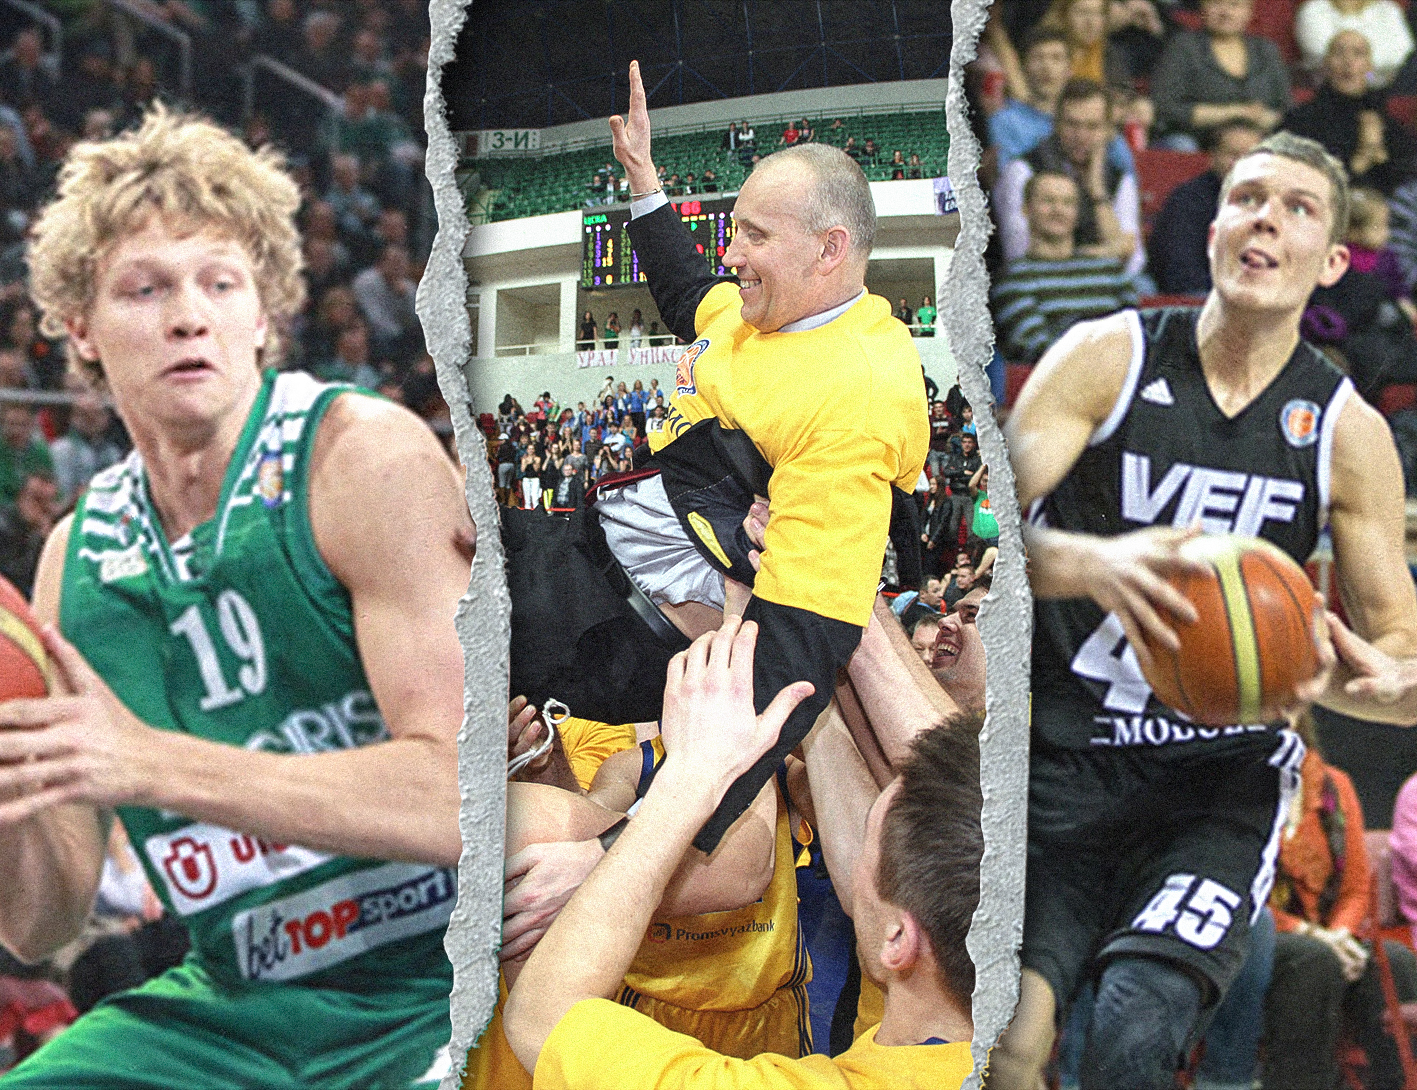 2010 class. Monia, Kuzminskas and 6 other players from 2010/11 season in 2020